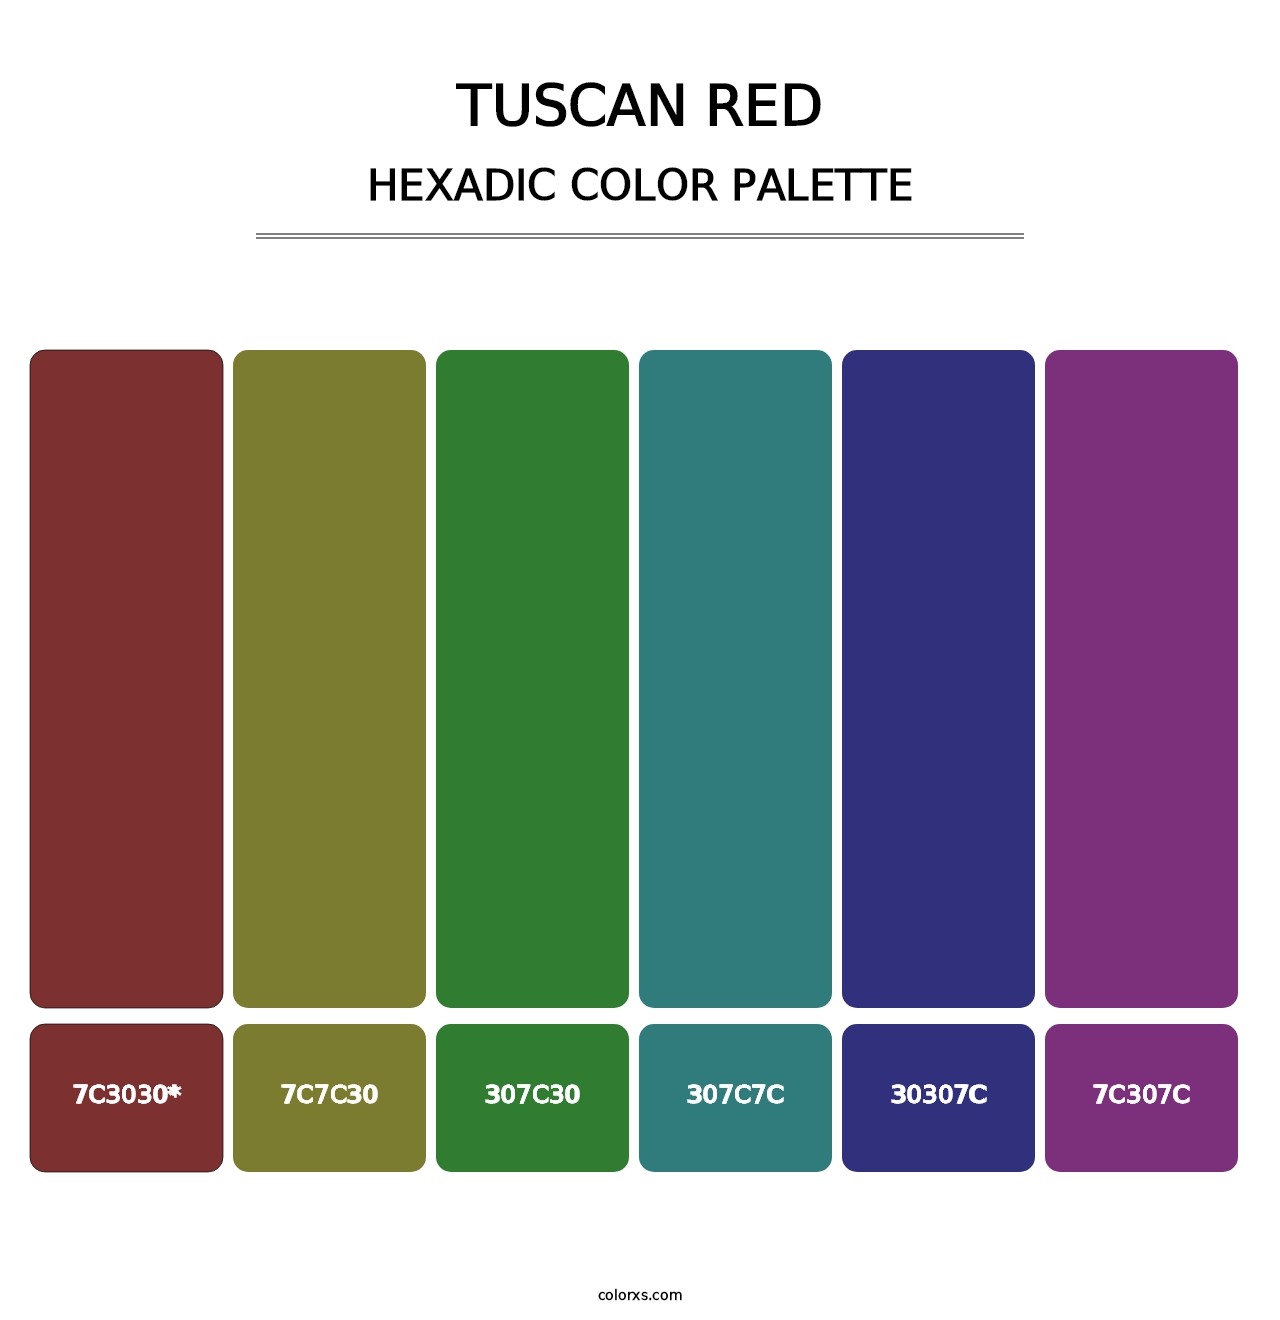 Tuscan Red - Hexadic Color Palette